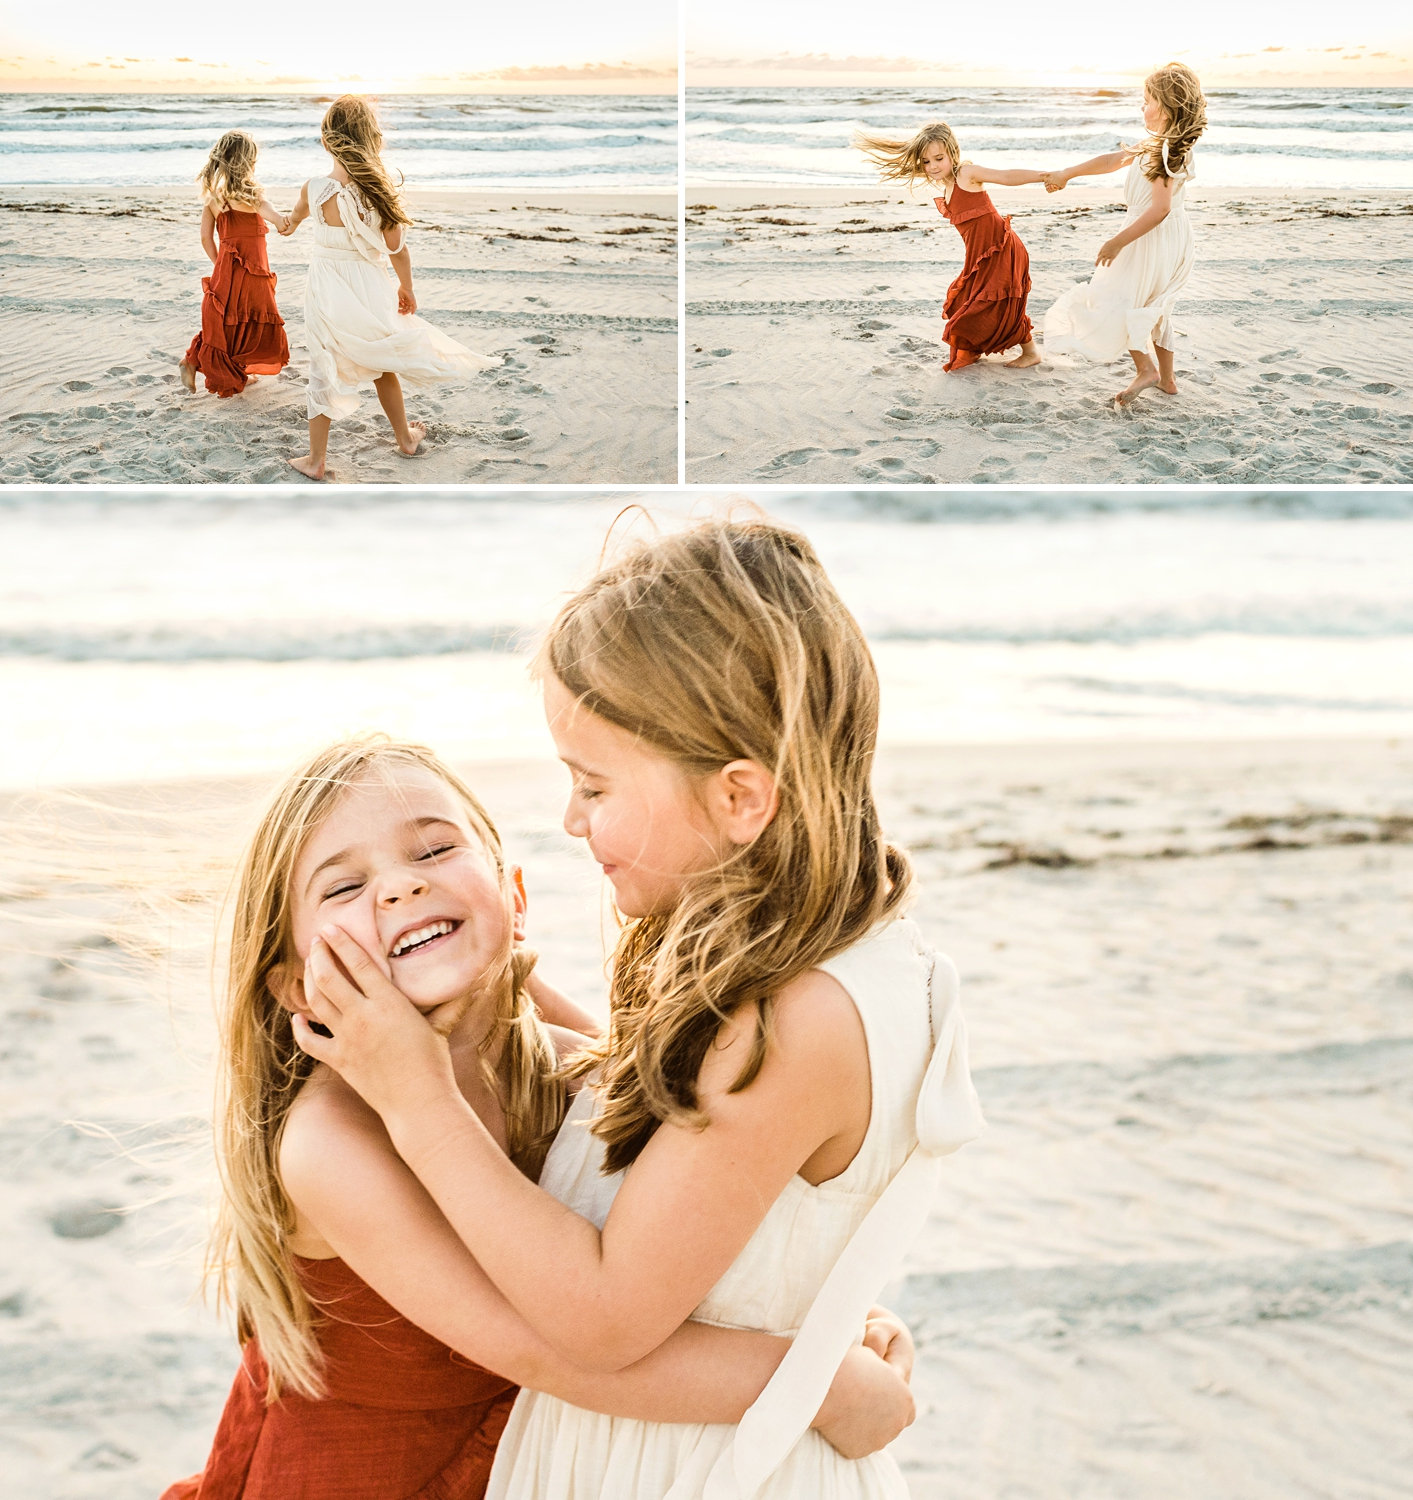 image collage, little sisters playing on a beach, The Ritz-Carlton, Amelia Island